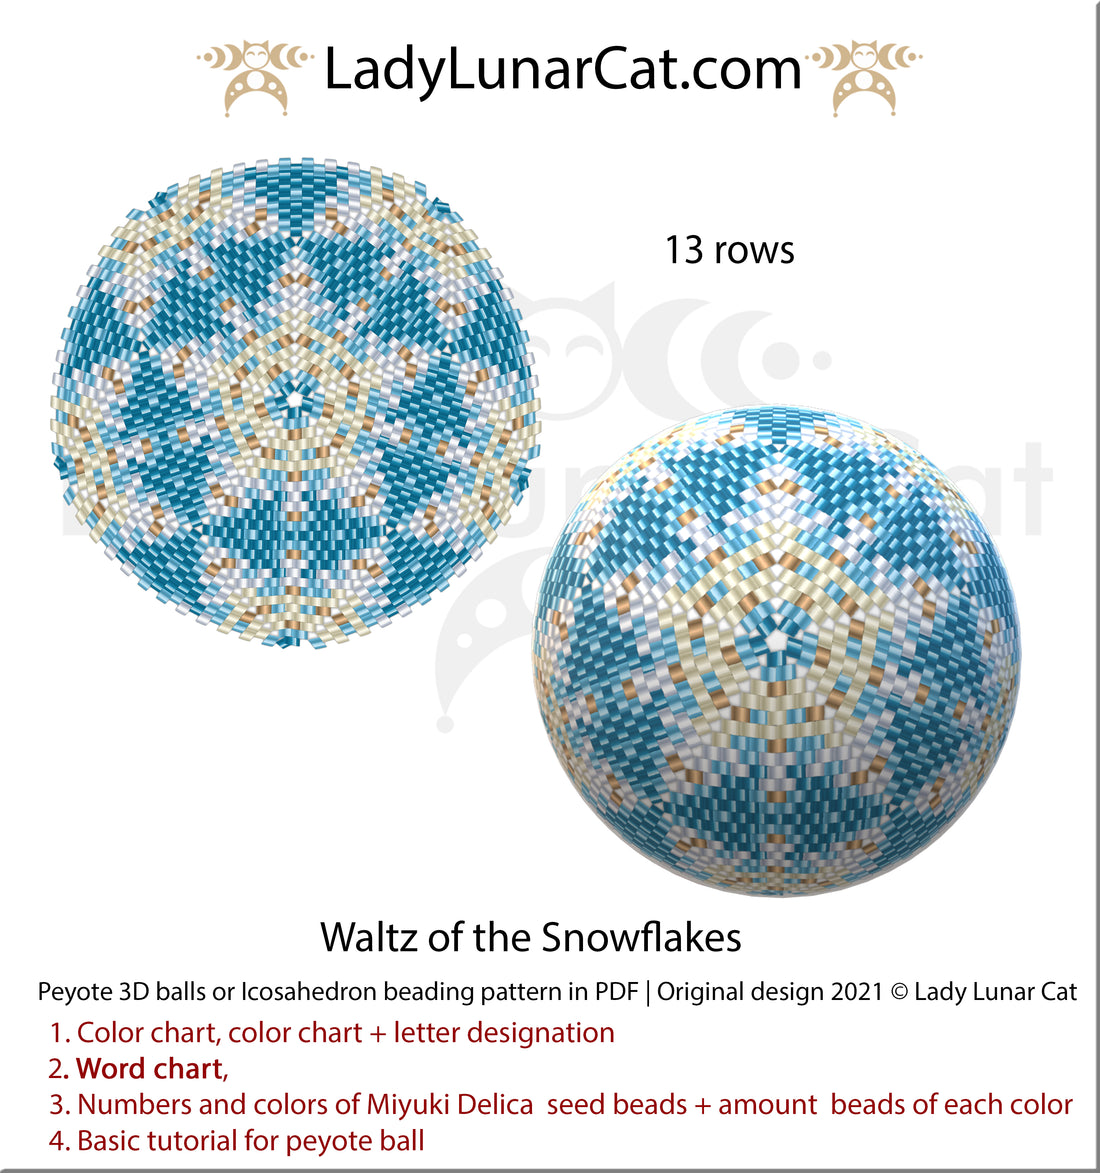 FREE Peyote ball pattern for beading Waltz of the Snowflakes by Lady Lunar Cat LadyLunarCat